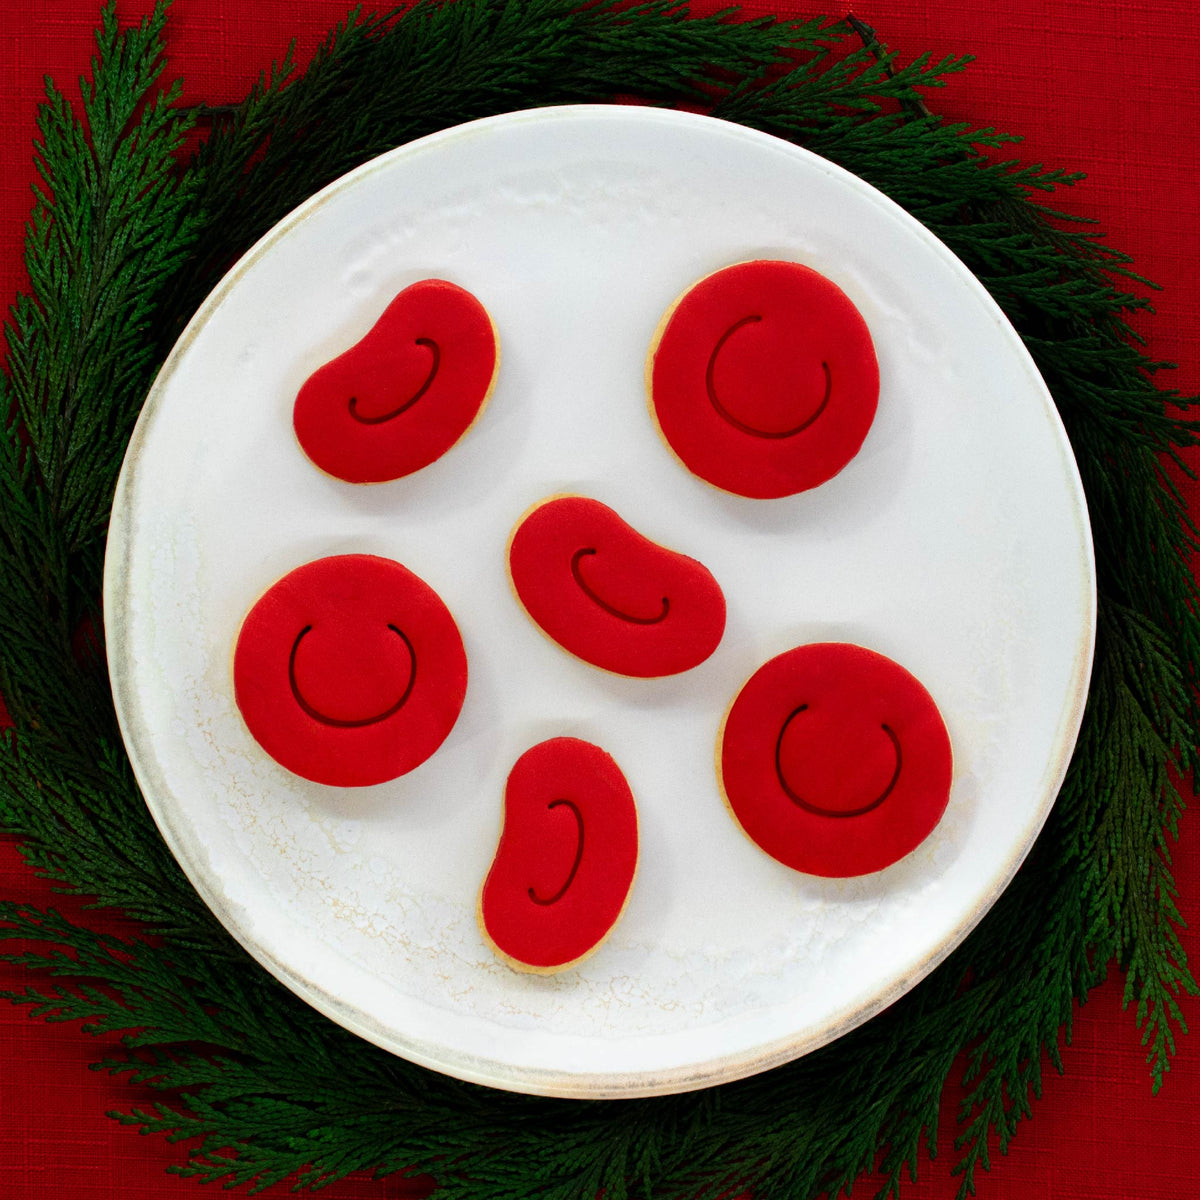 red blood cell fondant toppings on cookies made with bakerlogy red blood cell cookie cutters